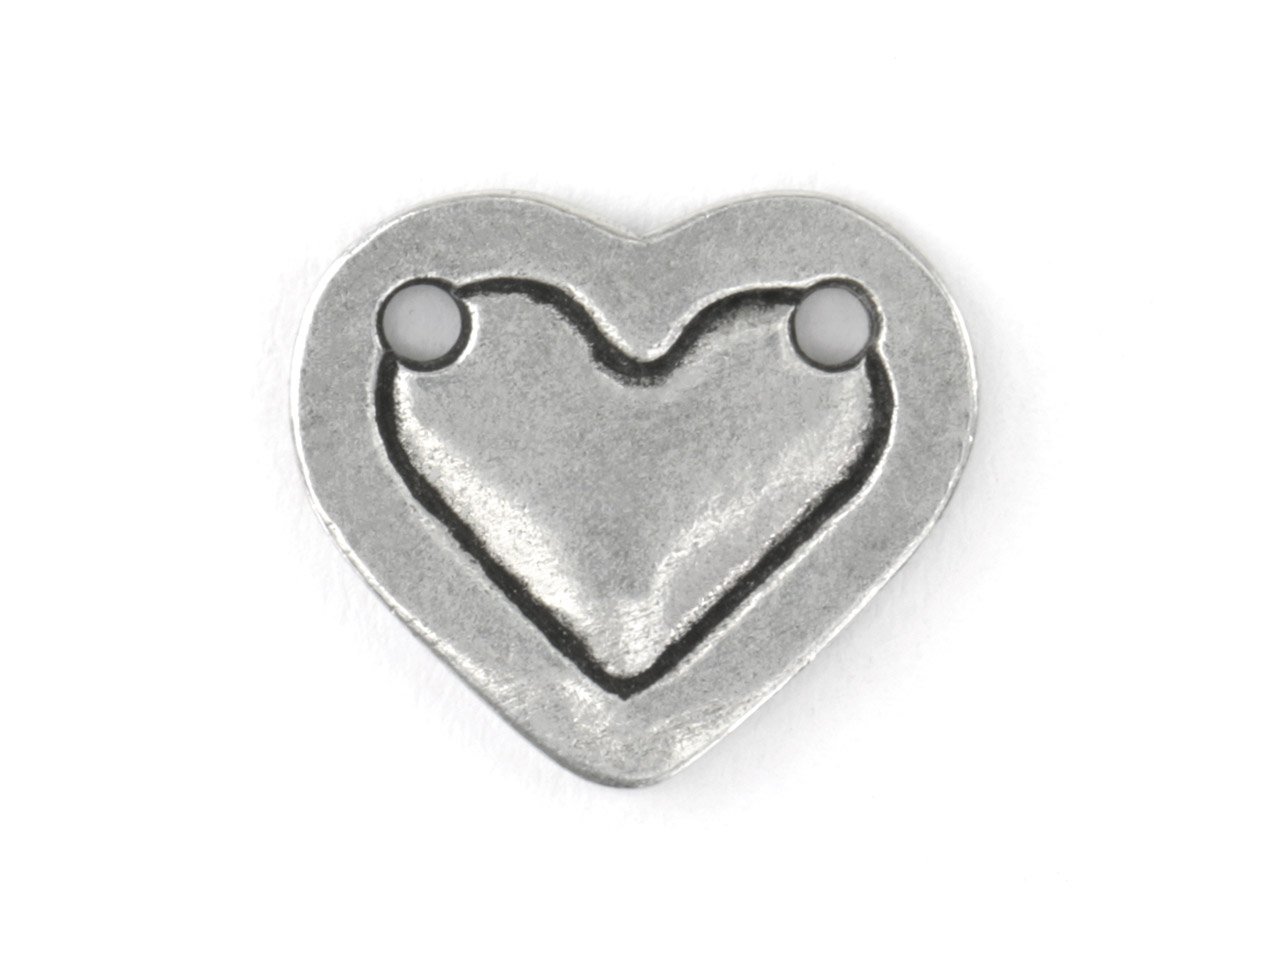 ImpressArt Small Heart Border Pewter Stamping Blank Clearance